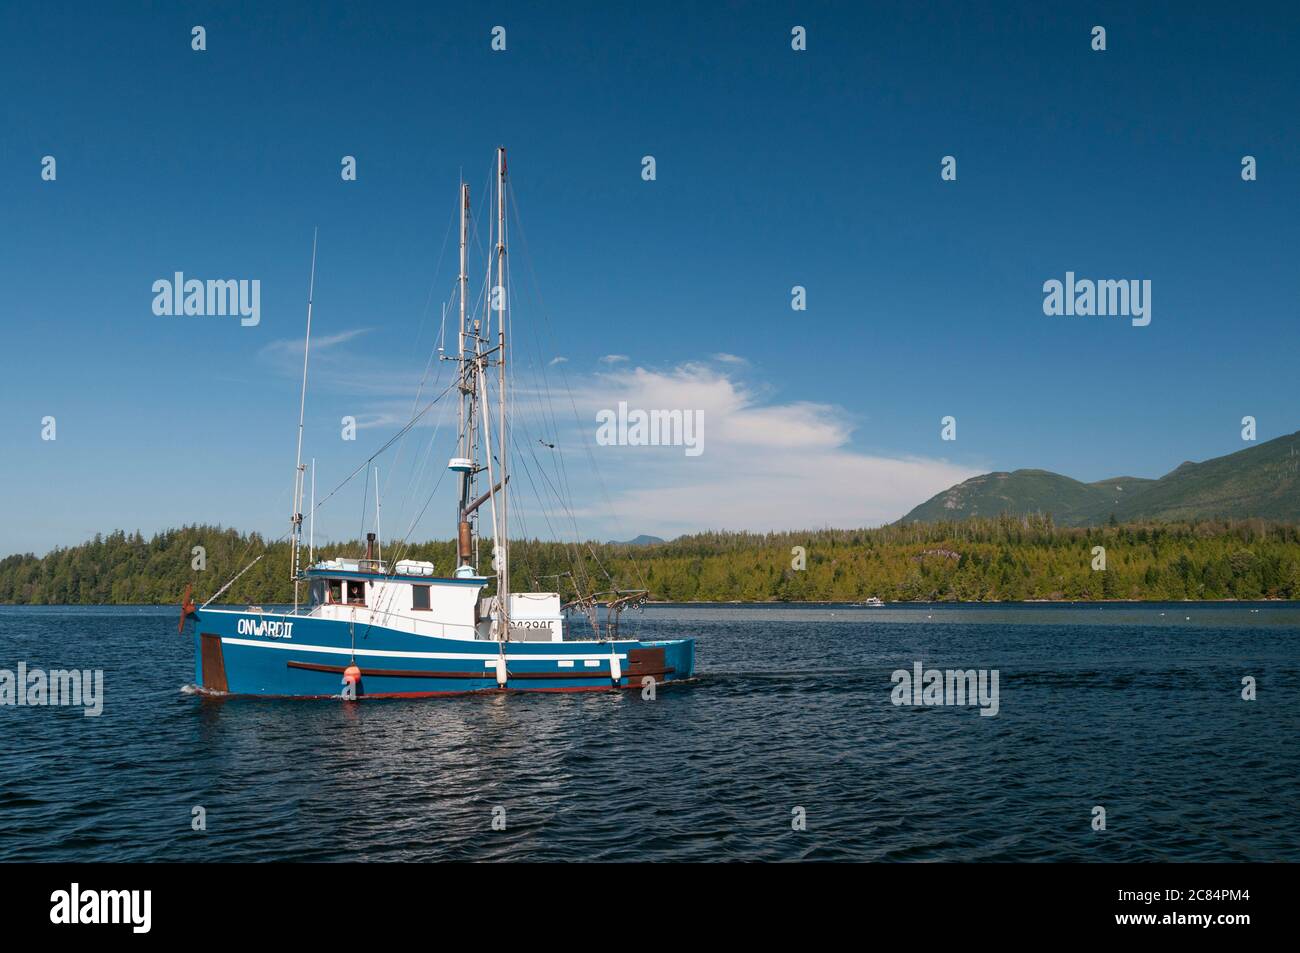 Fishing boat in the Ucluelet Inlet, Vancouver Island, British Columbia, Canada. Stock Photo